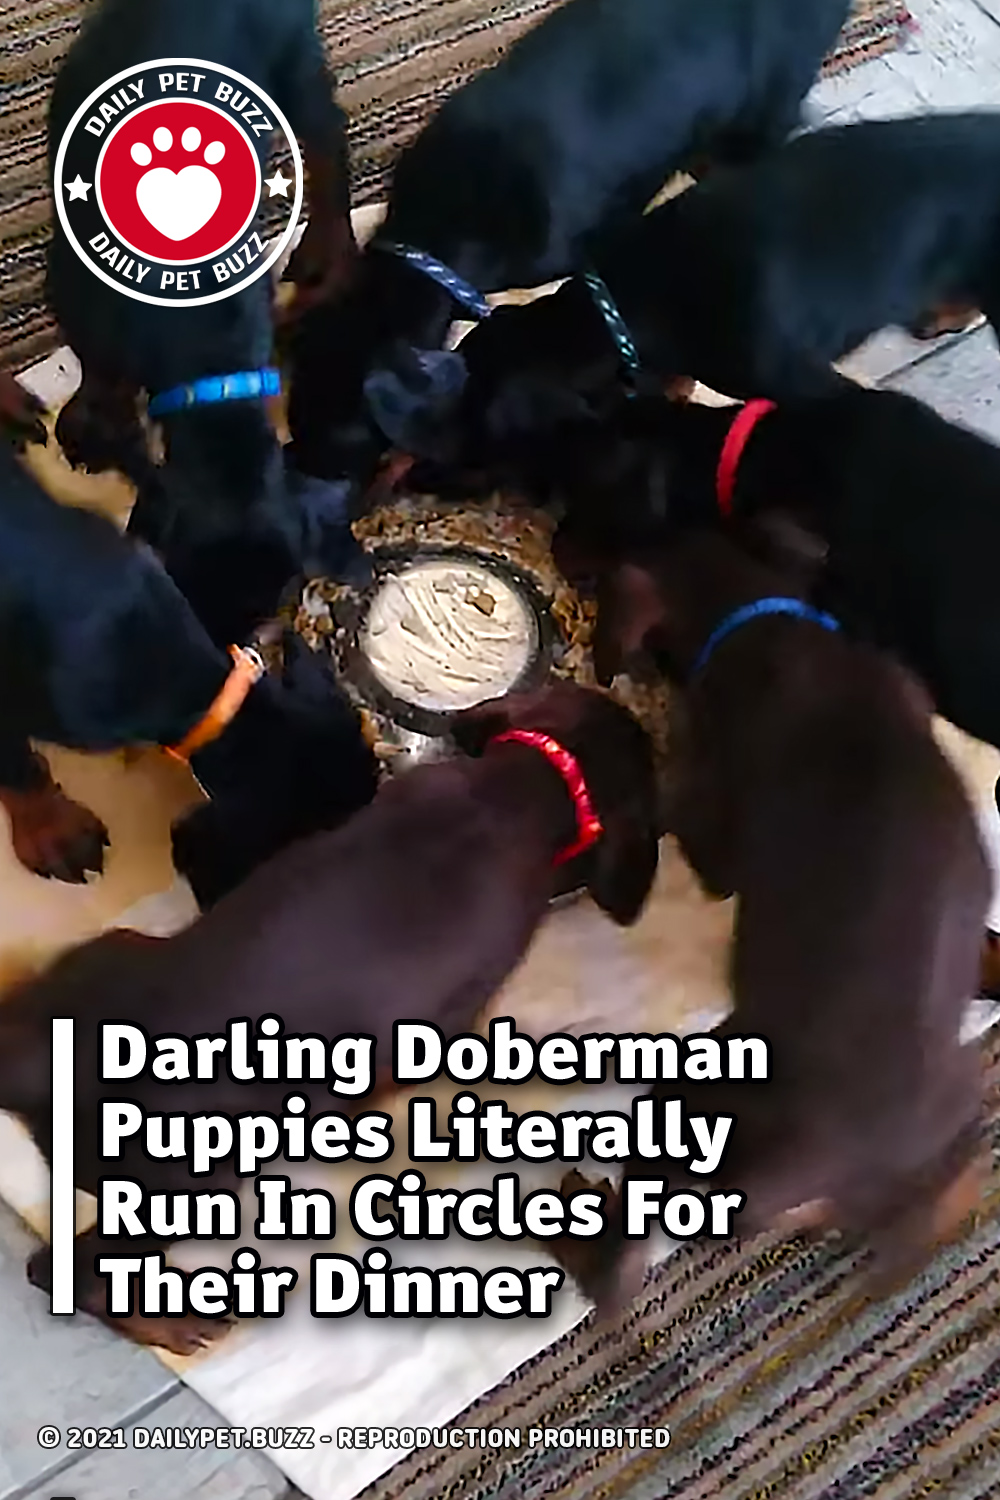 Darling Doberman Puppies Literally Run In Circles For Their Dinner